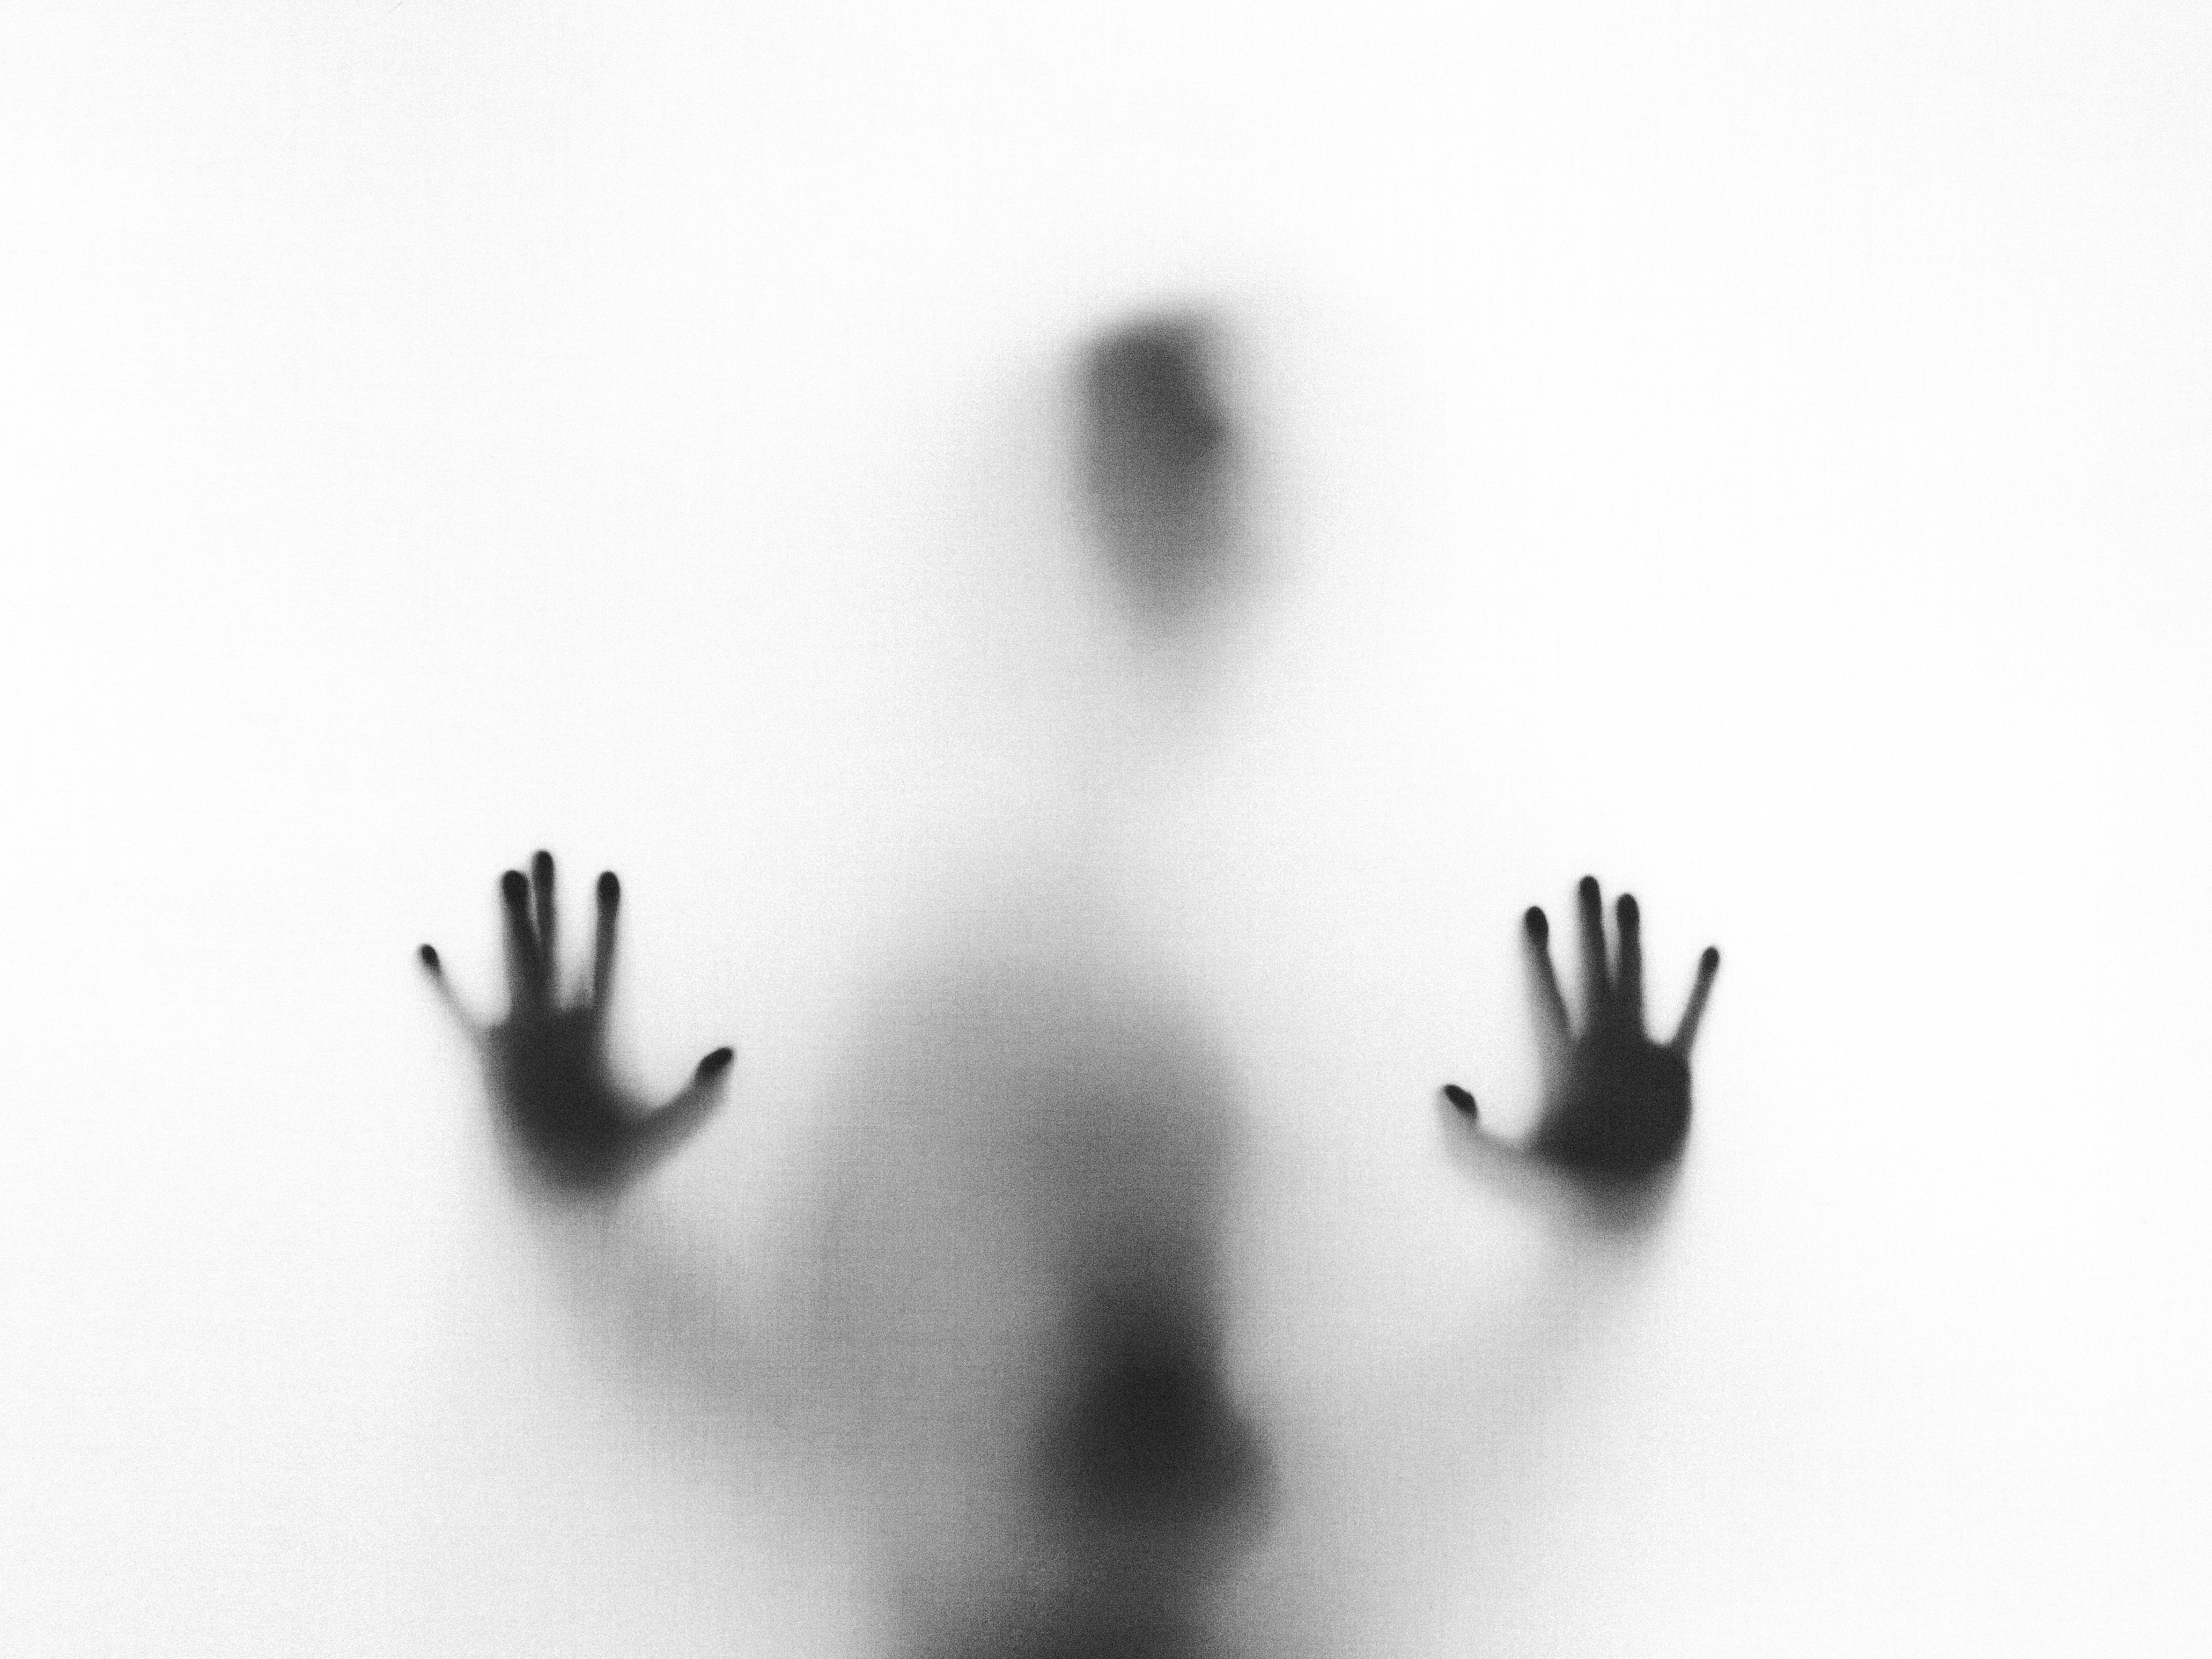 alt="shady figure with hands against frosted glass"